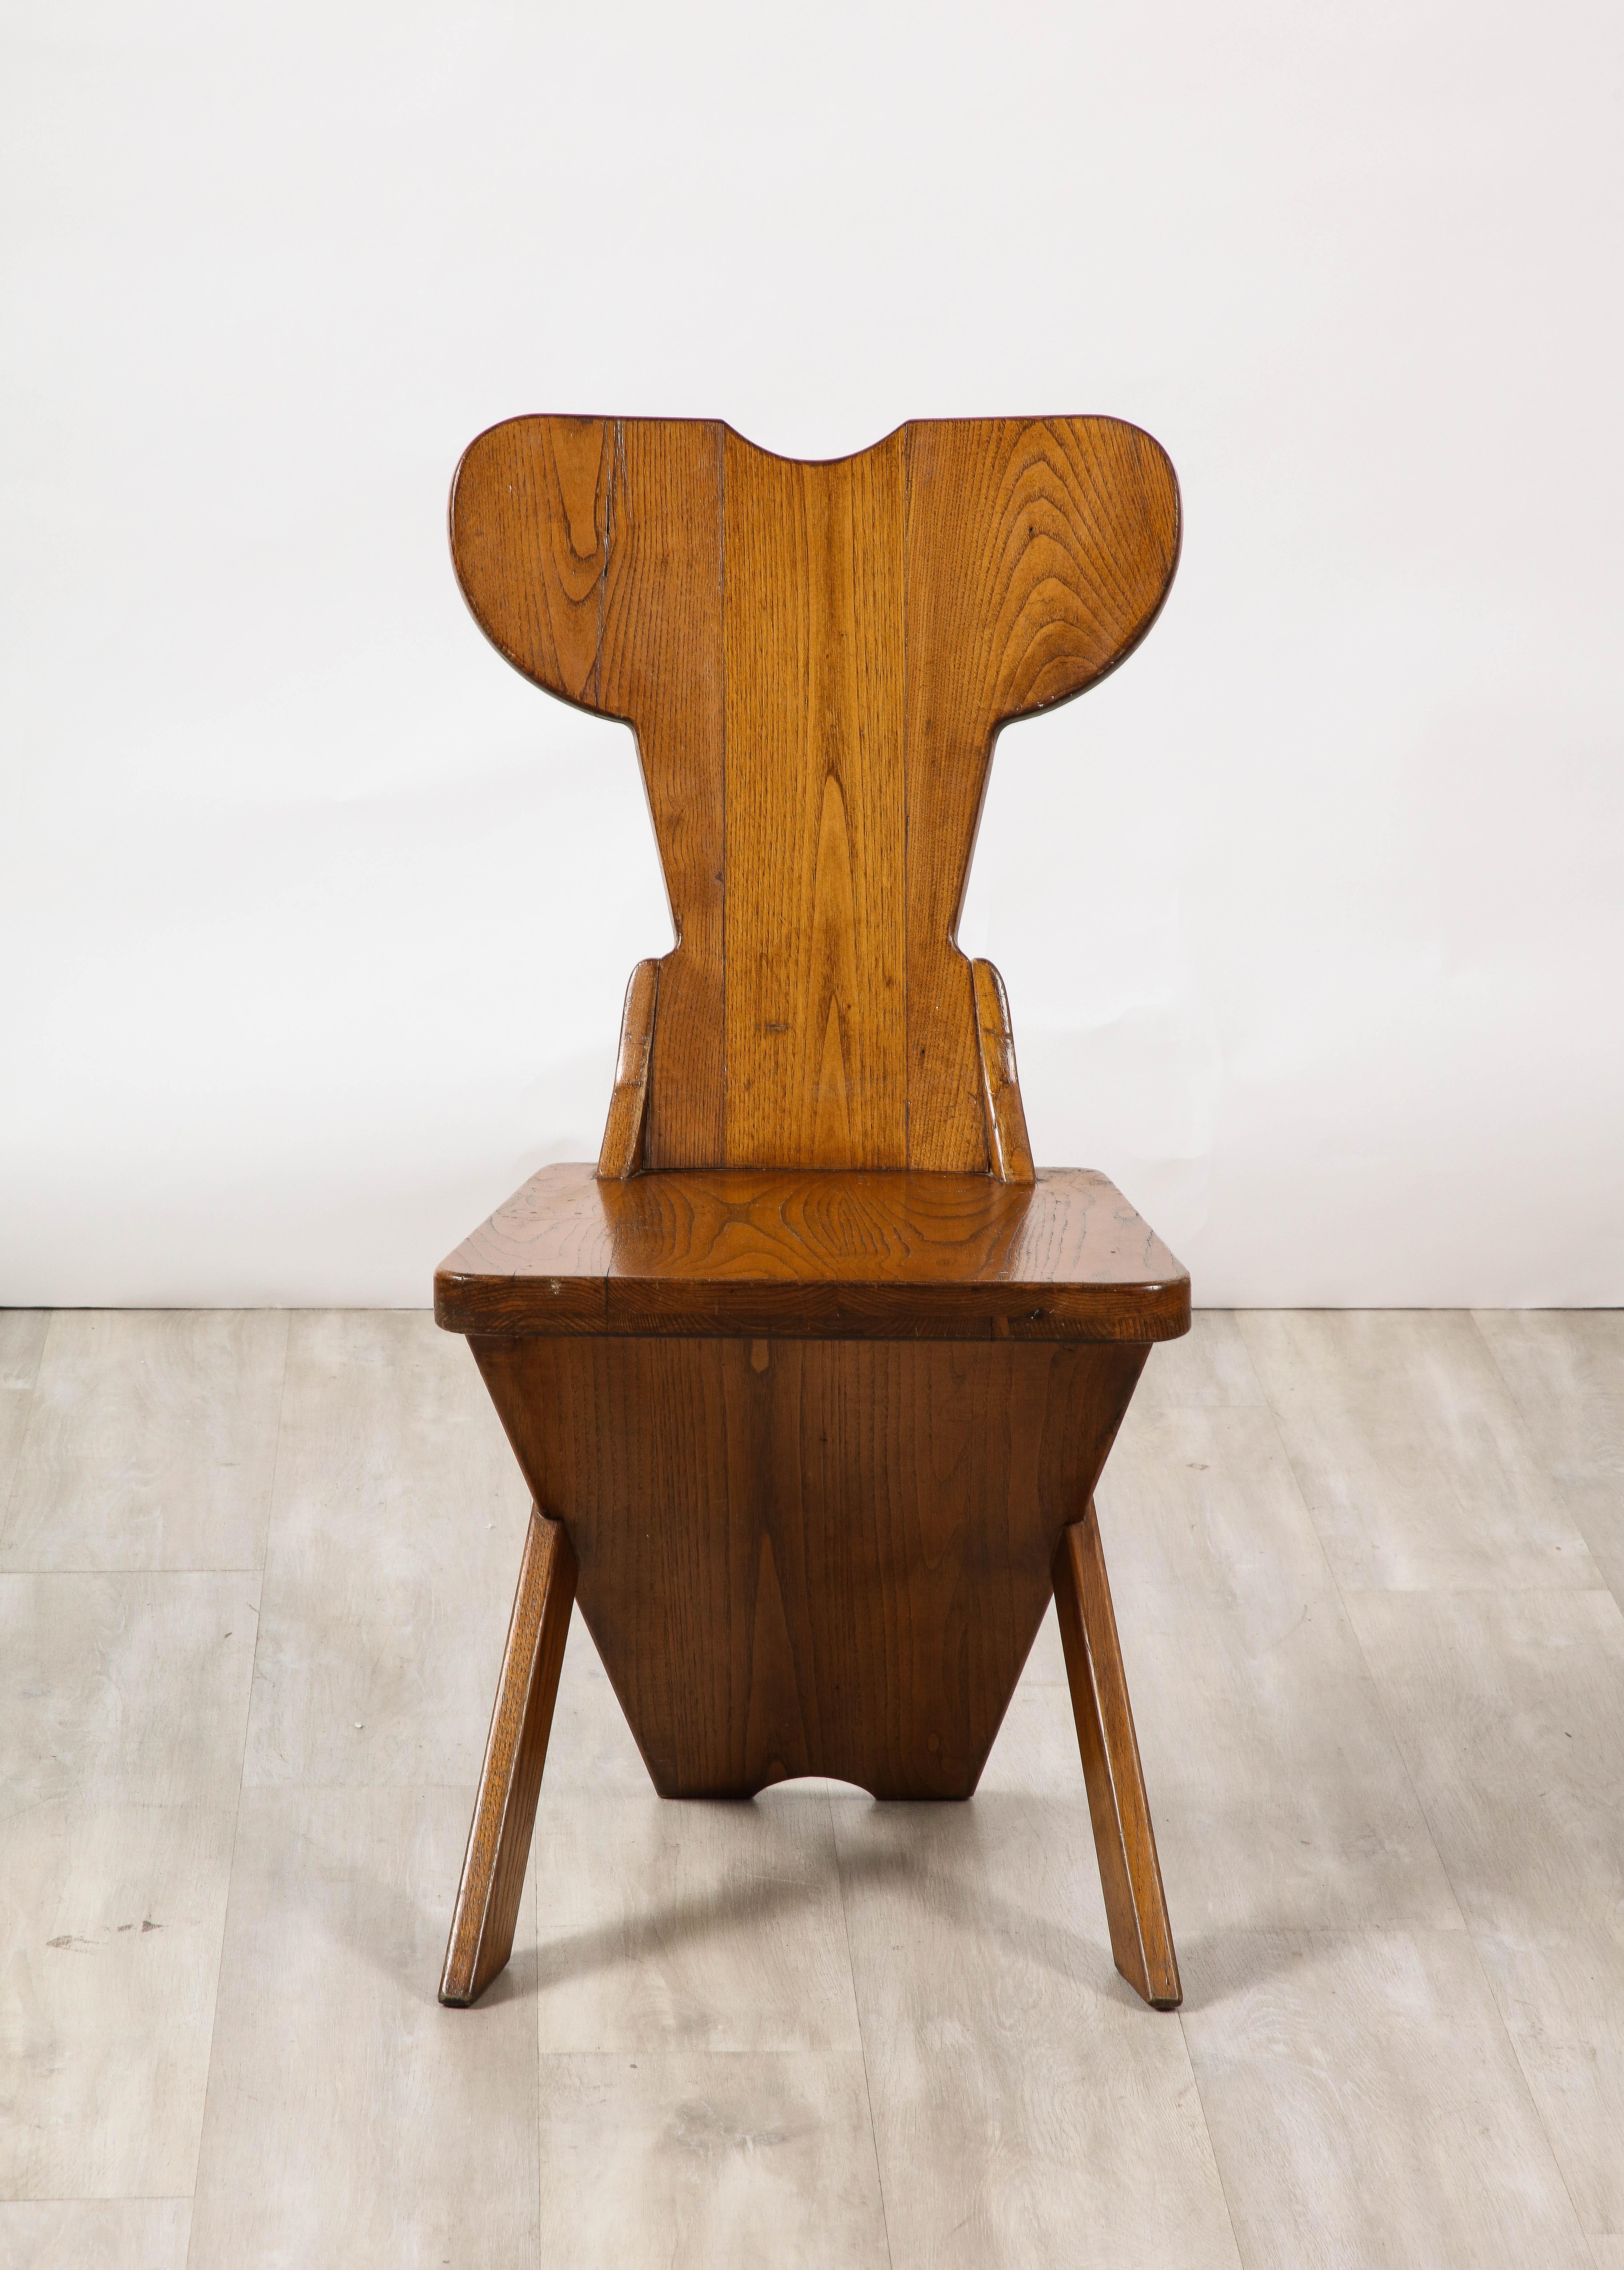 A wonderful and charming set of four dining or side chairs, displaying  traditional artistic craftsmanship, combining folk with modernism, geometric forms and practical minimalism.  The chairs are made in solid oak, with angled seats and carved